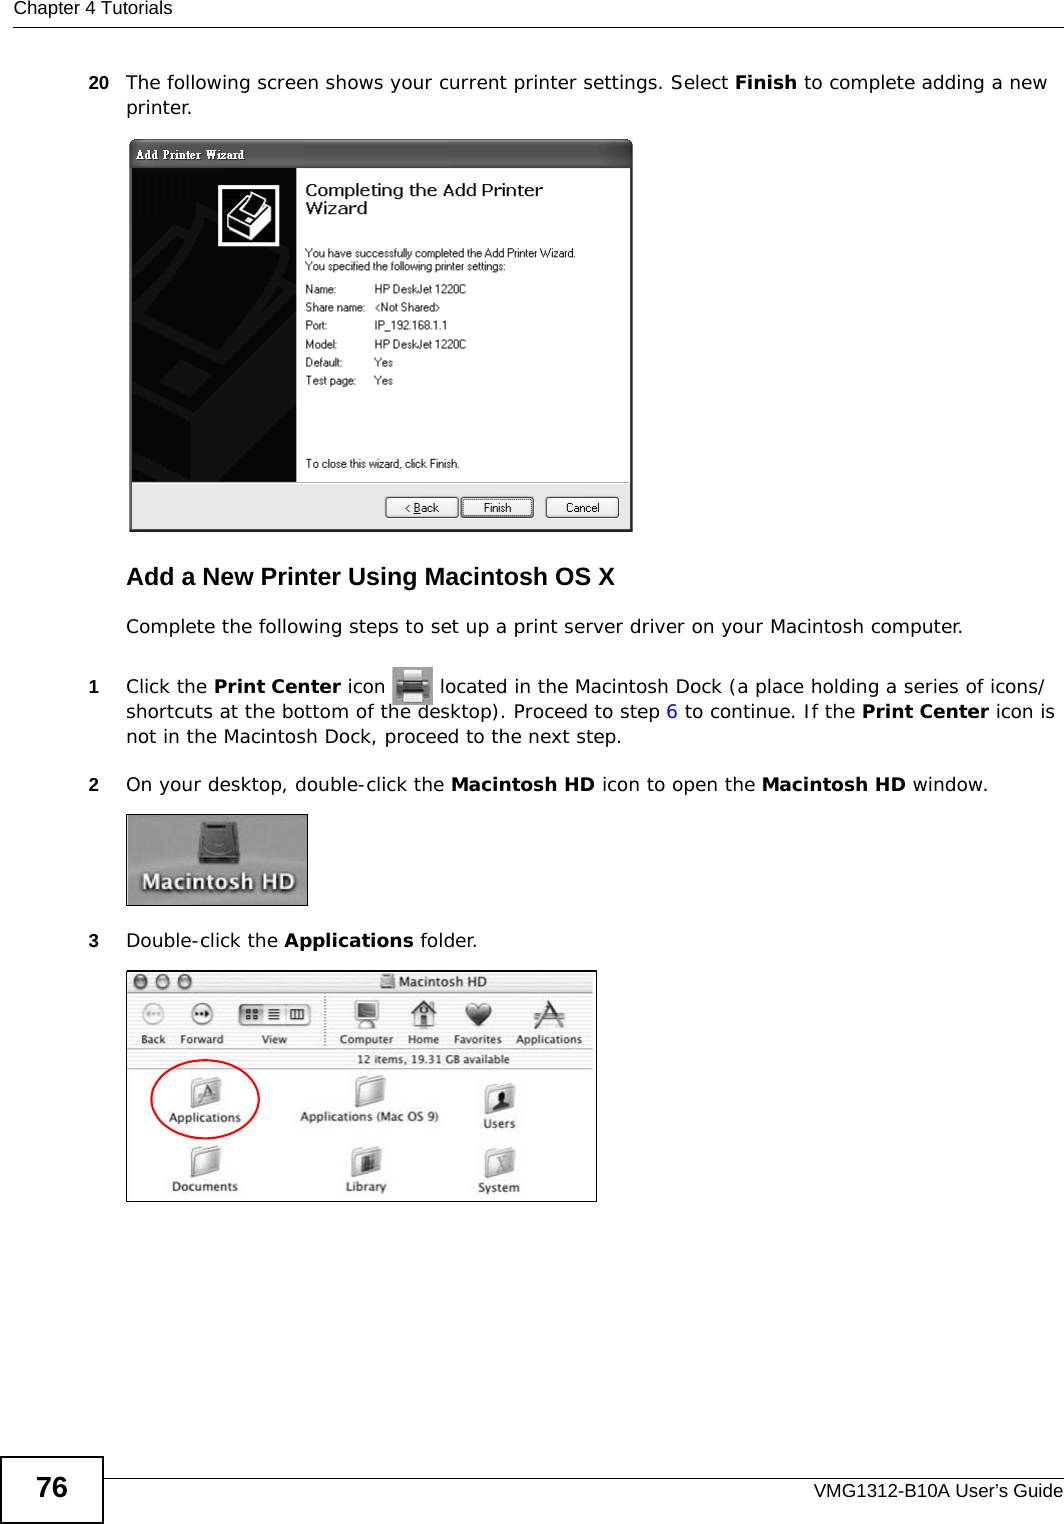 Chapter 4 TutorialsVMG1312-B10A User’s Guide7620 The following screen shows your current printer settings. Select Finish to complete adding a new printer.Tutorial: Add Printer Wizard CompleteAdd a New Printer Using Macintosh OS XComplete the following steps to set up a print server driver on your Macintosh computer.1Click the Print Center icon   located in the Macintosh Dock (a place holding a series of icons/shortcuts at the bottom of the desktop). Proceed to step 6 to continue. If the Print Center icon is not in the Macintosh Dock, proceed to the next step.2On your desktop, double-click the Macintosh HD icon to open the Macintosh HD window.Tutorial: Macintosh HD3Double-click the Applications folder.   Tutorial: Macintosh HD folder